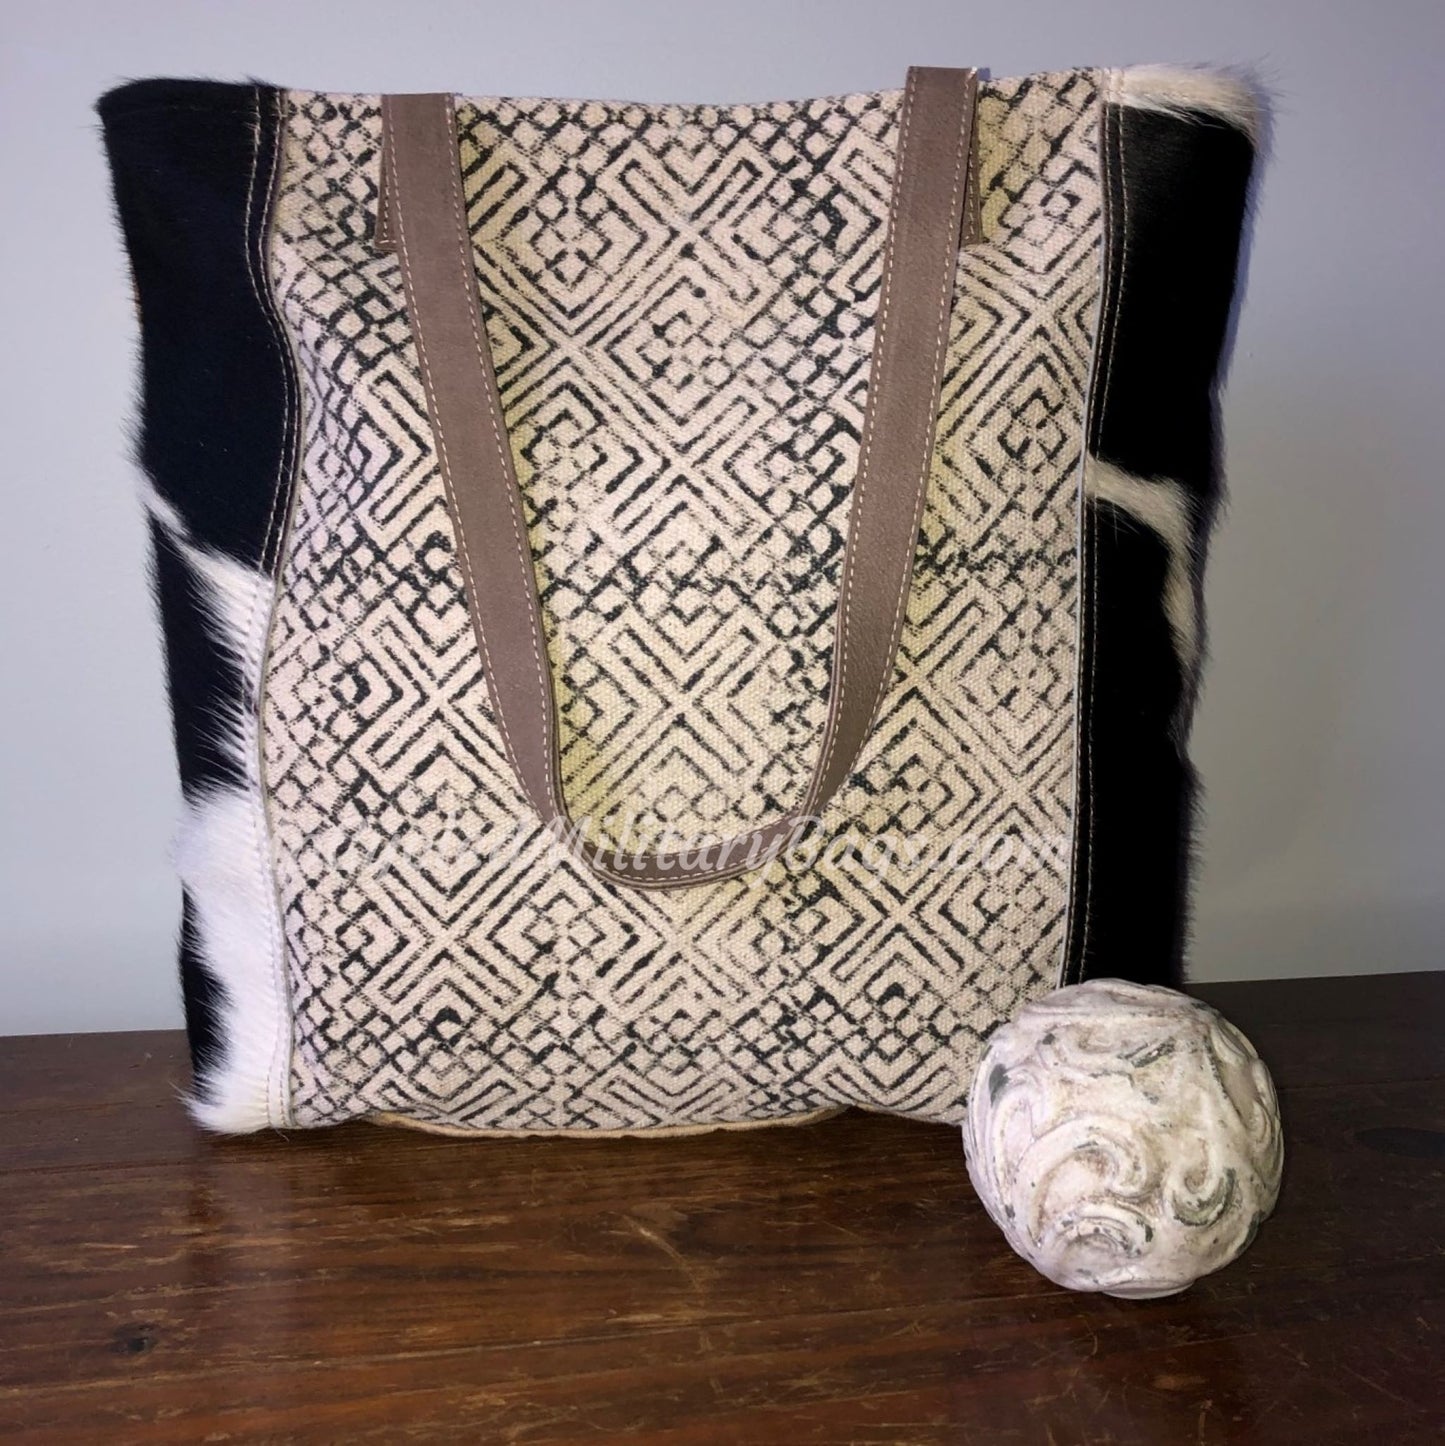 Black & White Hair on Hide Shoulder Bag Purse ~ Classic and Gorgeous Sustainable Tote!